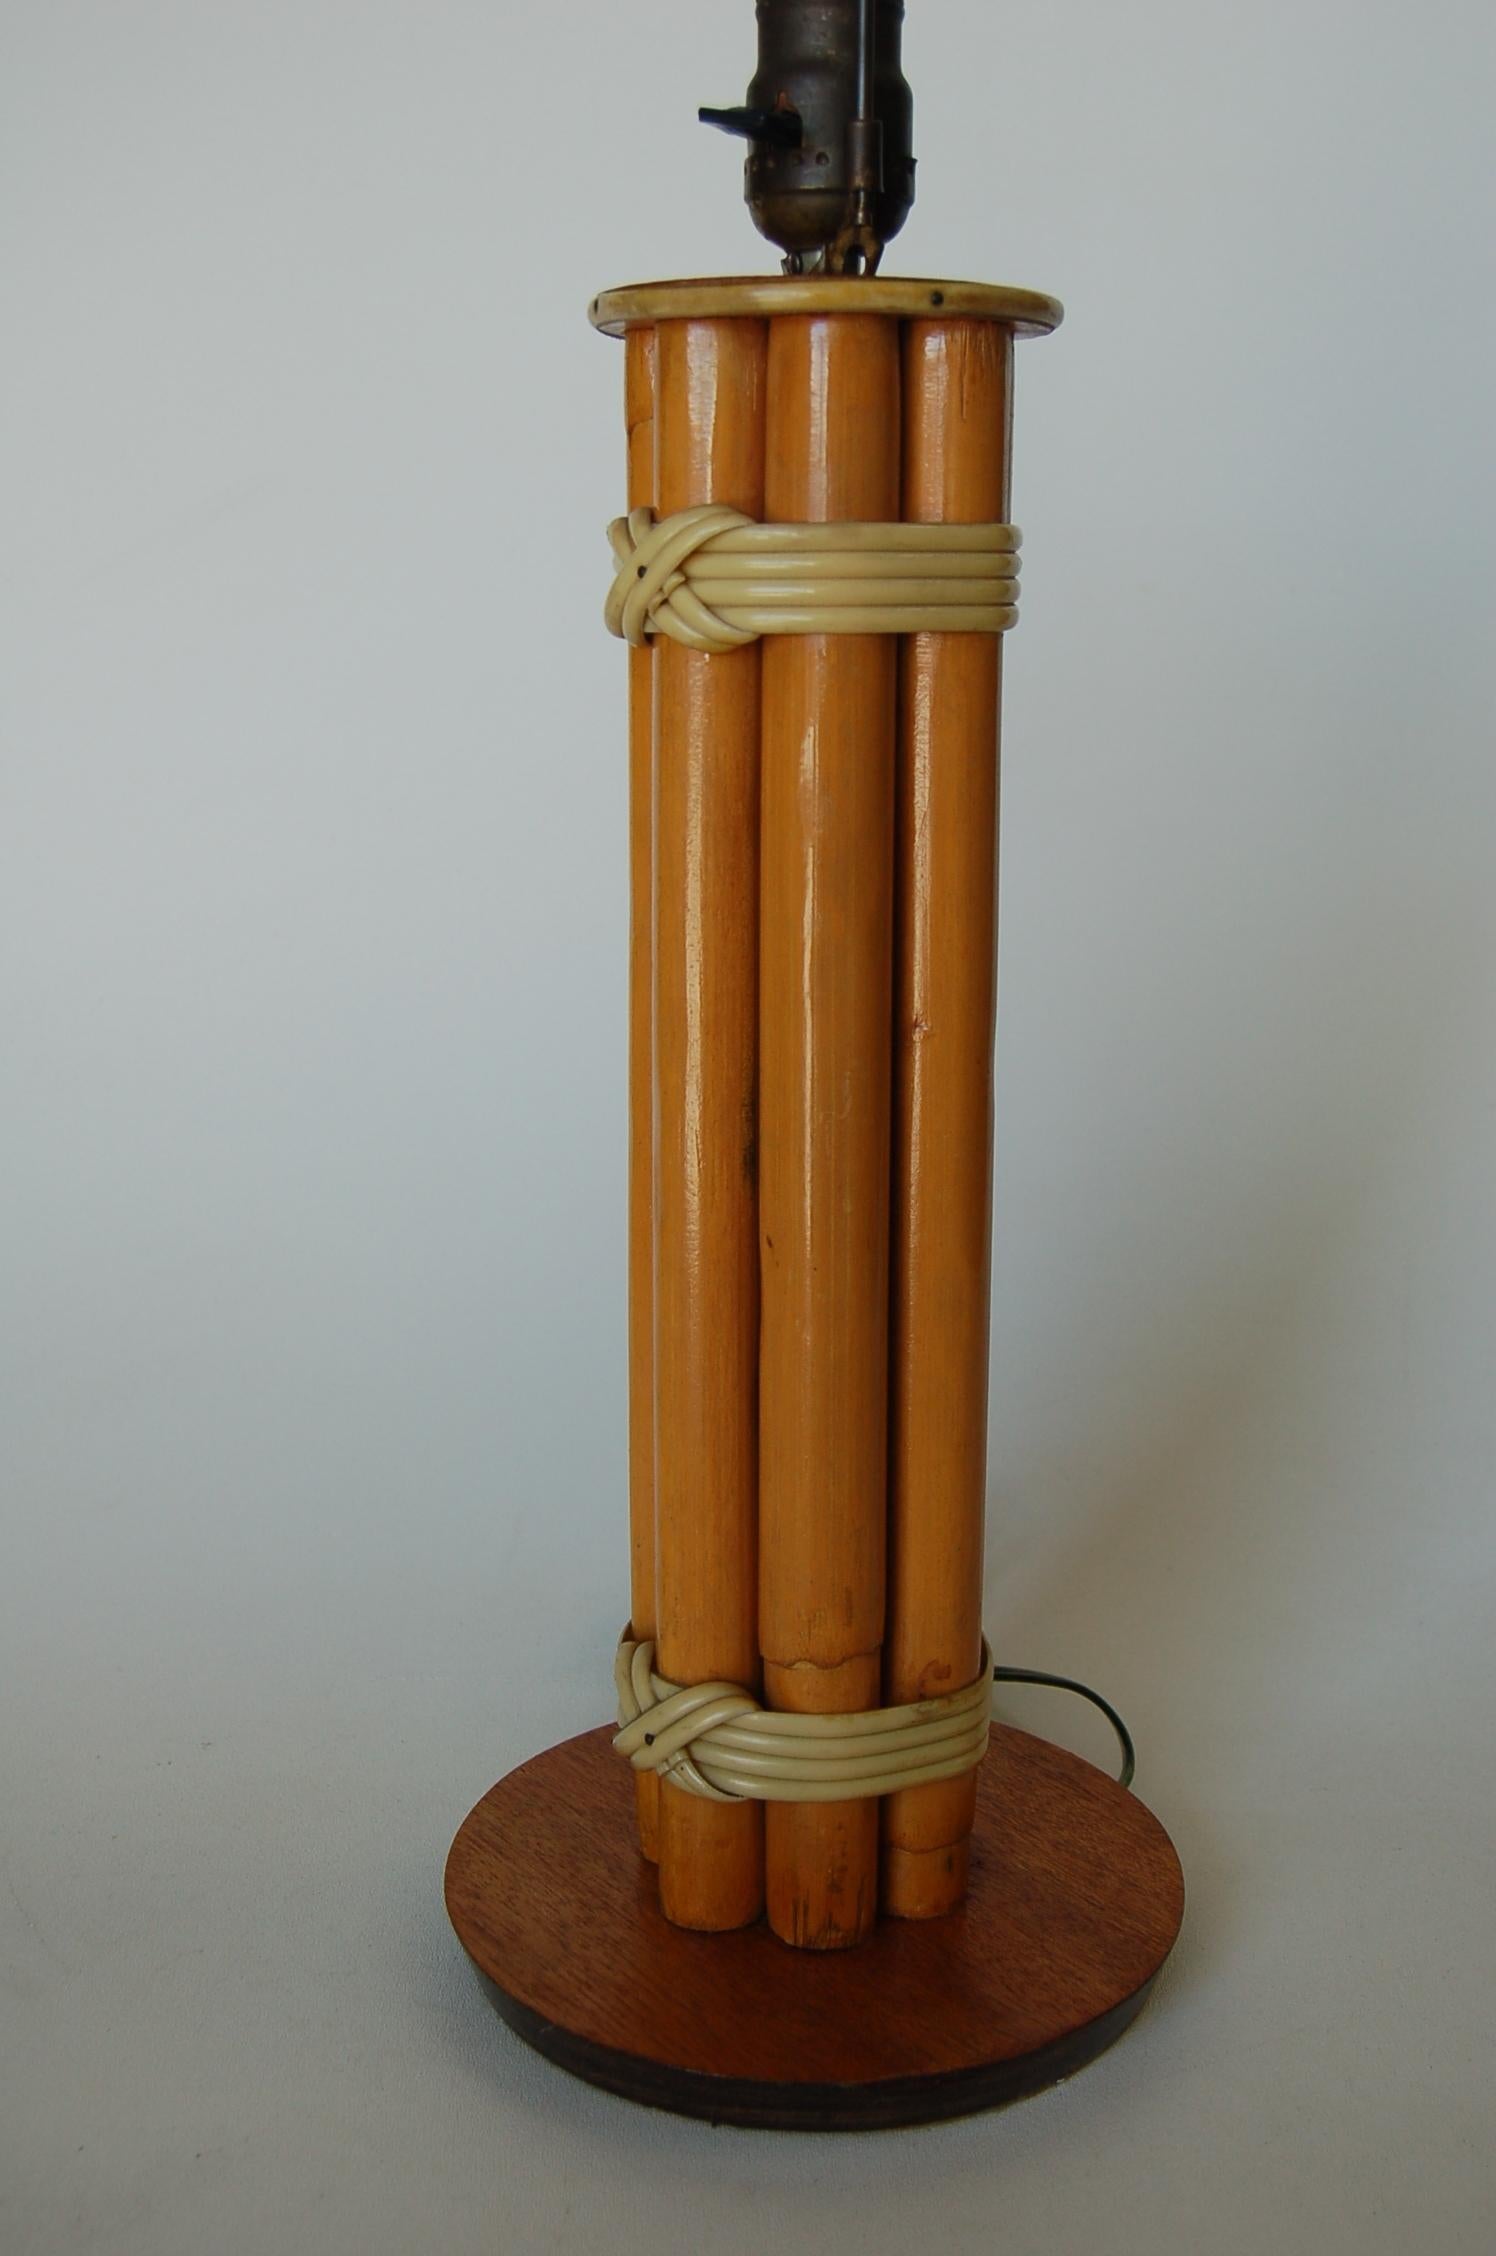 Restored midcentury round rattan table lamp featuring seven decorative rattan poles centered around a rattan post all fixed to a wood circular base, circa 1950. 

Measures: 7